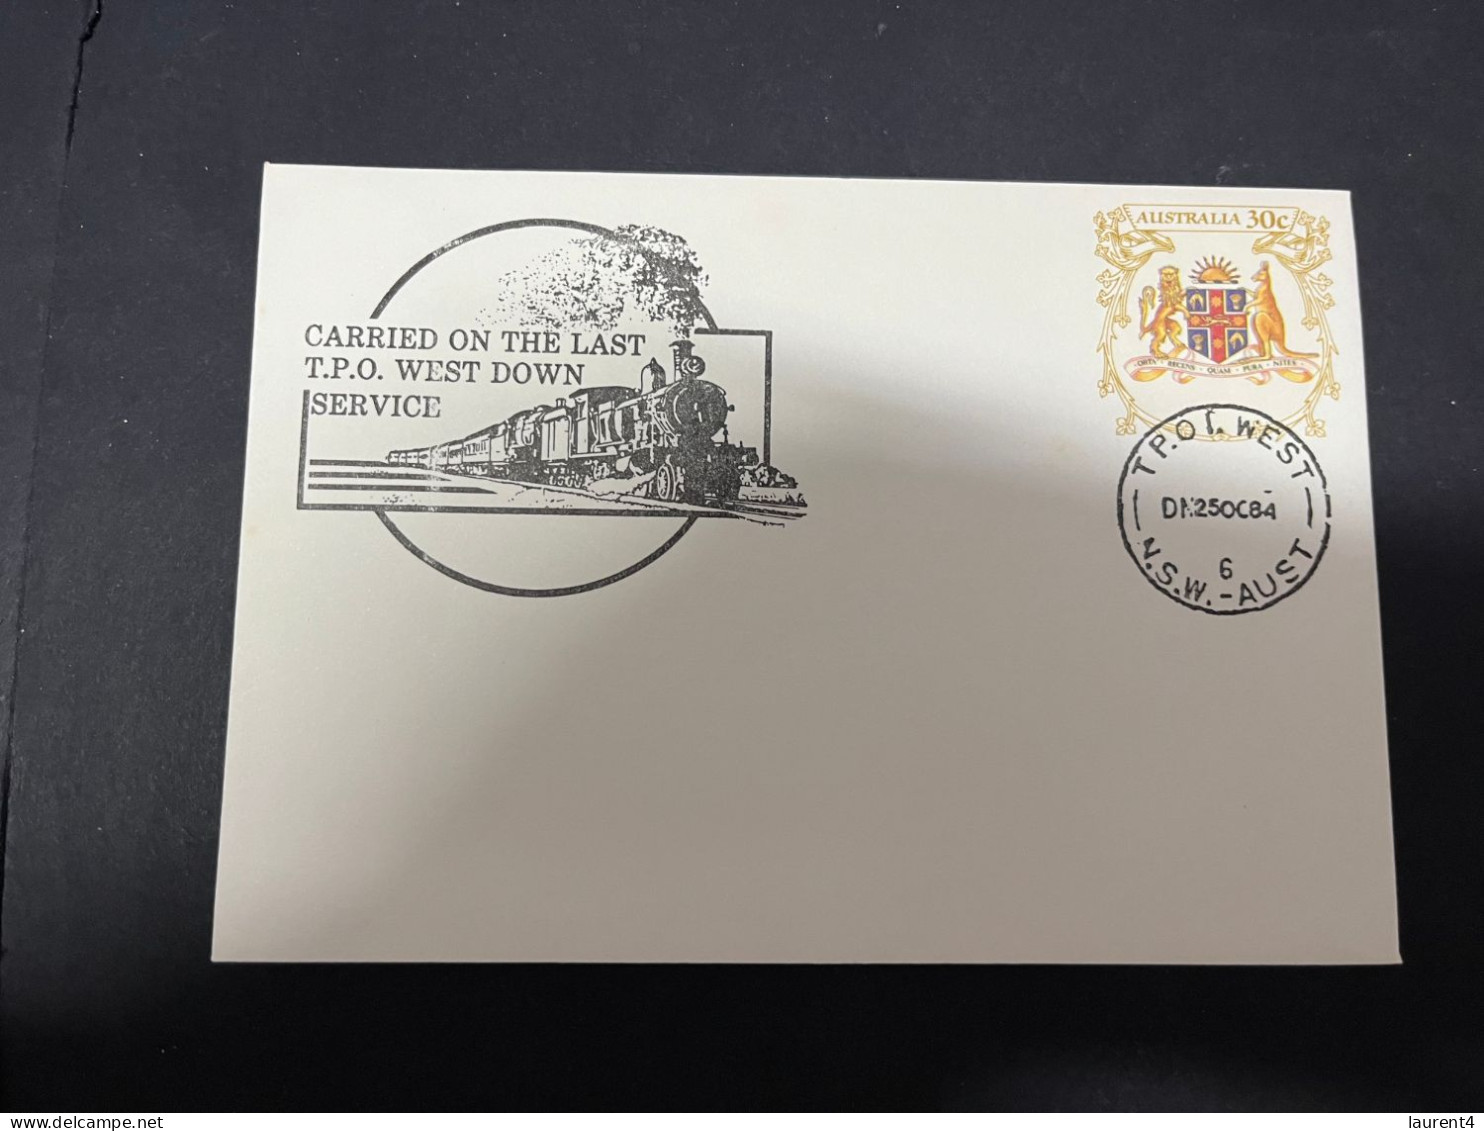 30-4-2023 (3 Z 29) Australia FDC (2 Covers) 1984 - Carried On The Last T.P.O. Service (mail Train) - Ersttagsbelege (FDC)